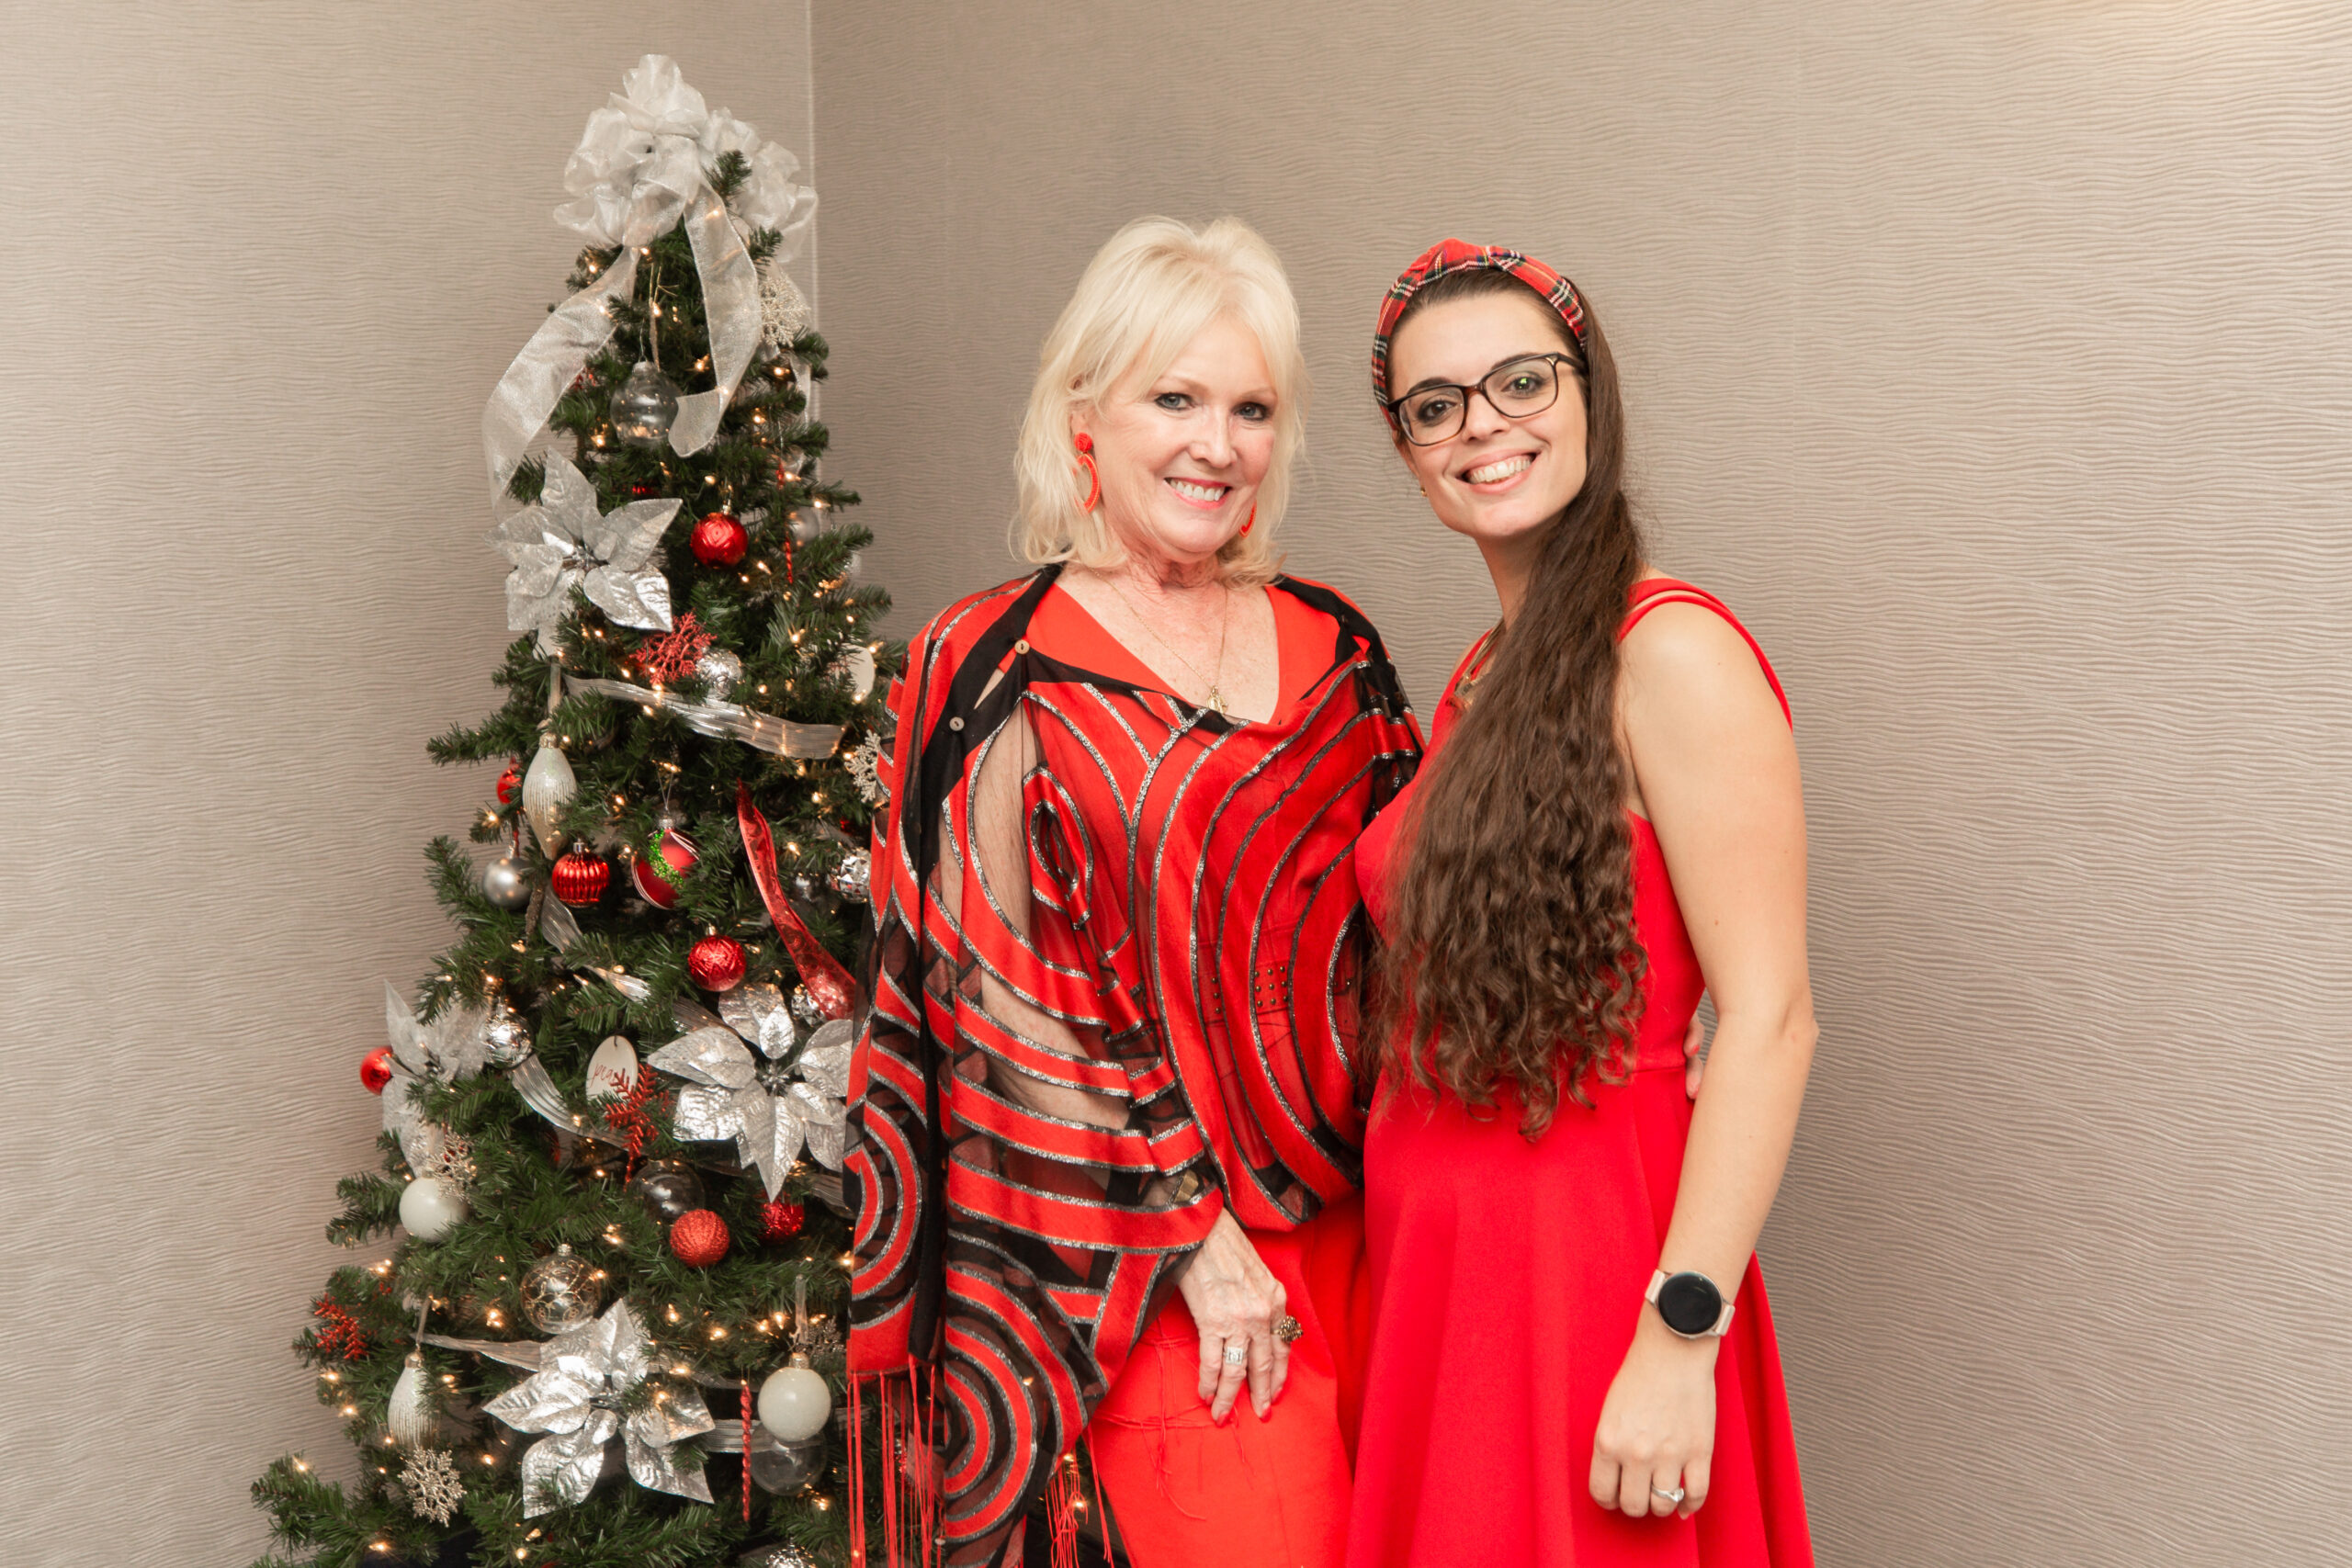 Broker Associate Kate Rushton and Web Designer Solange Edwards looking festive at the party